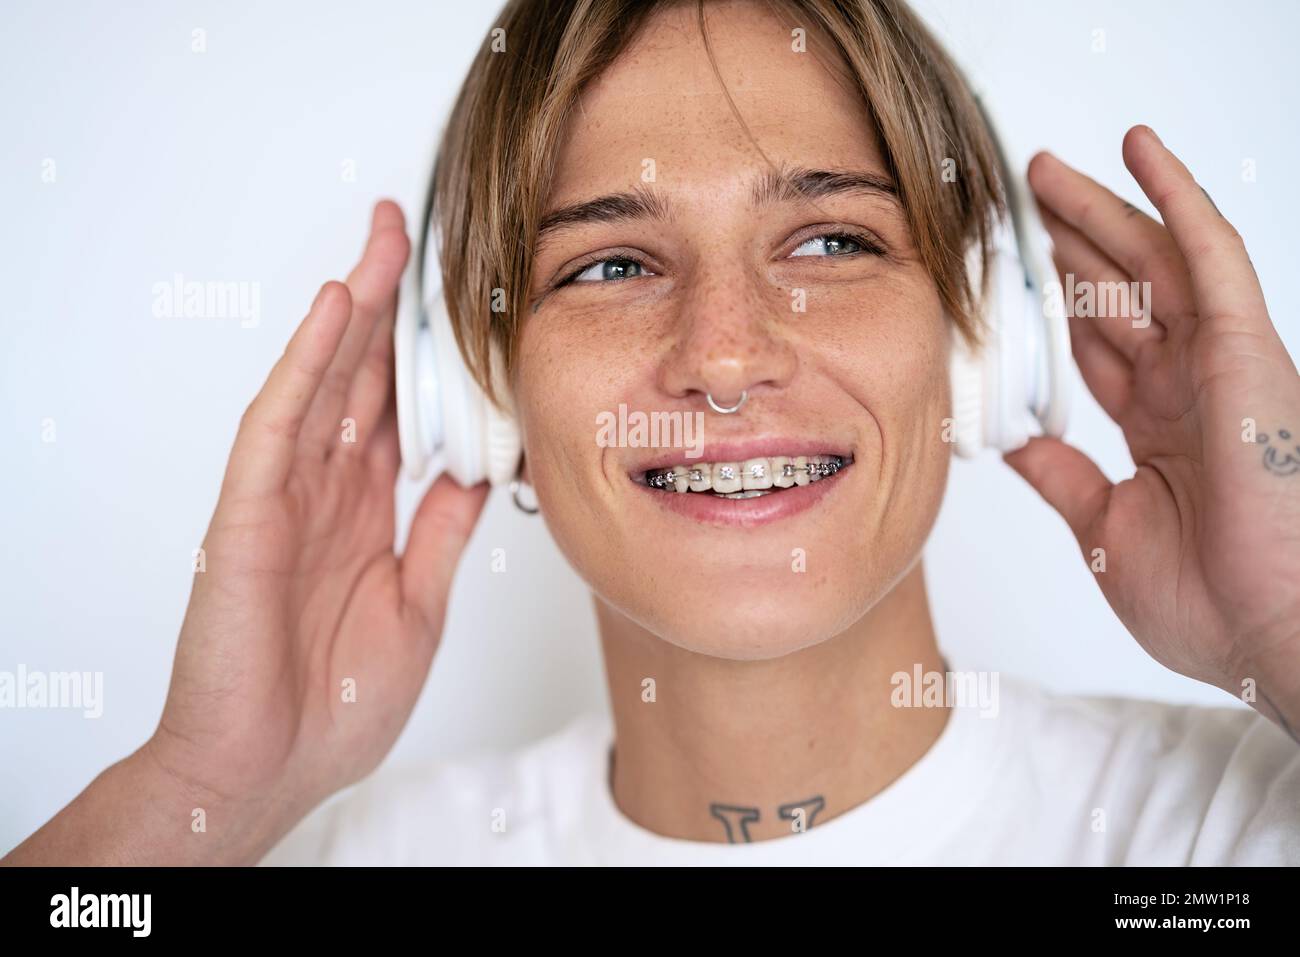 Blonde woman with headphones facial piercing and dental braces smiling close-up headshot. Stock Photo